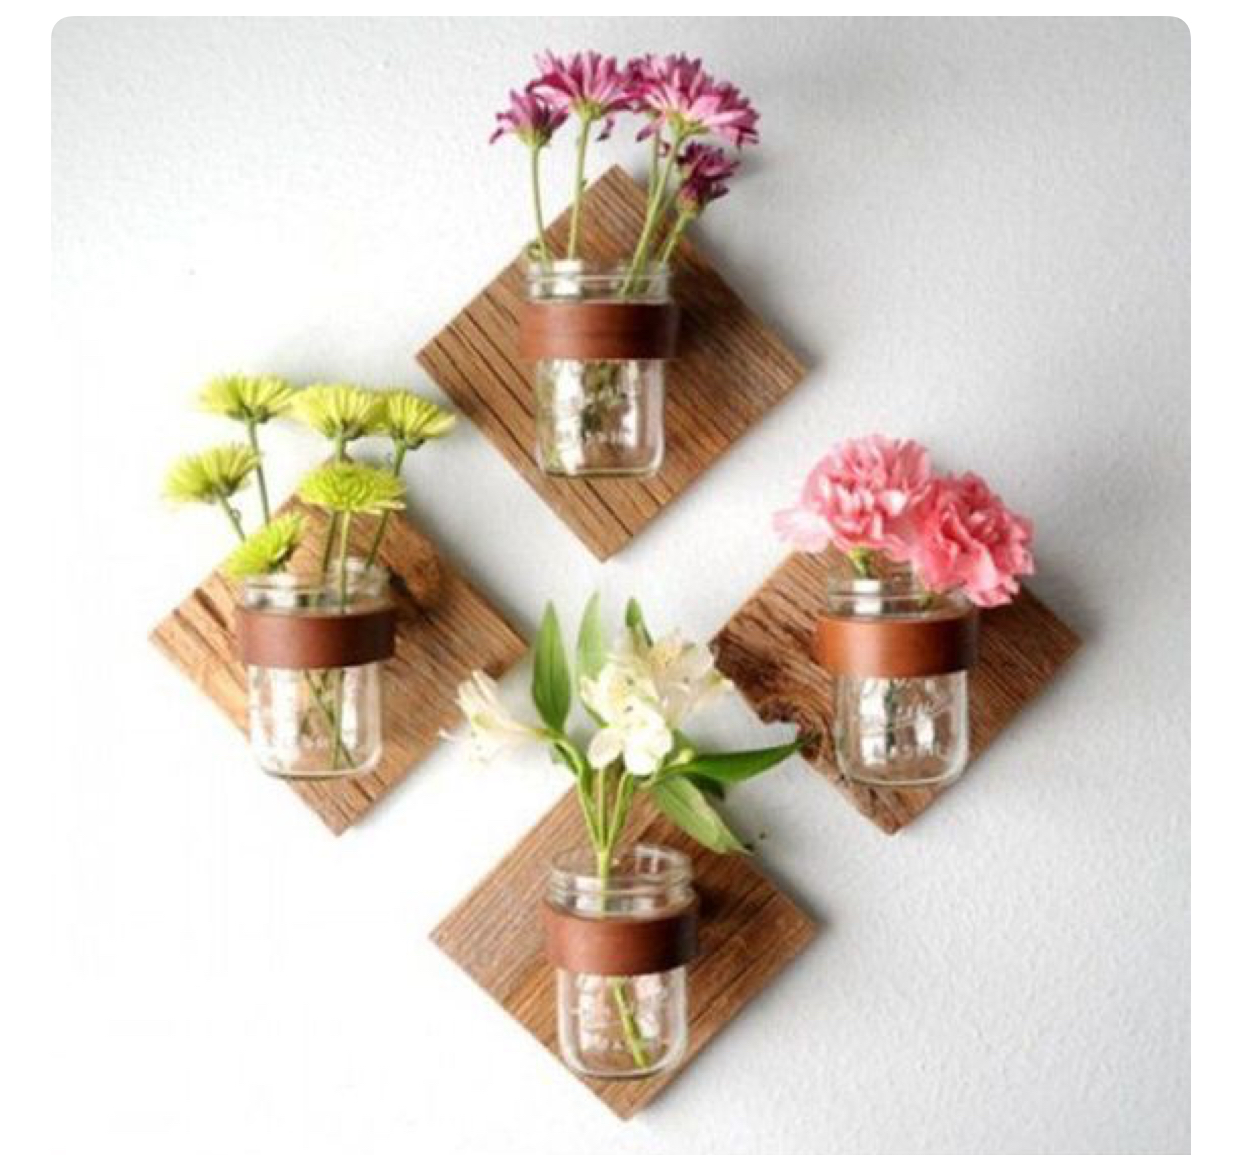 DIY wood wall vases with a boho feel, bud vases, boho decor, diy wood decor, studio 5, crafts, how to make a wood wall vase, cute mason jar wall vase, woodworking, how to hang wood to wall,